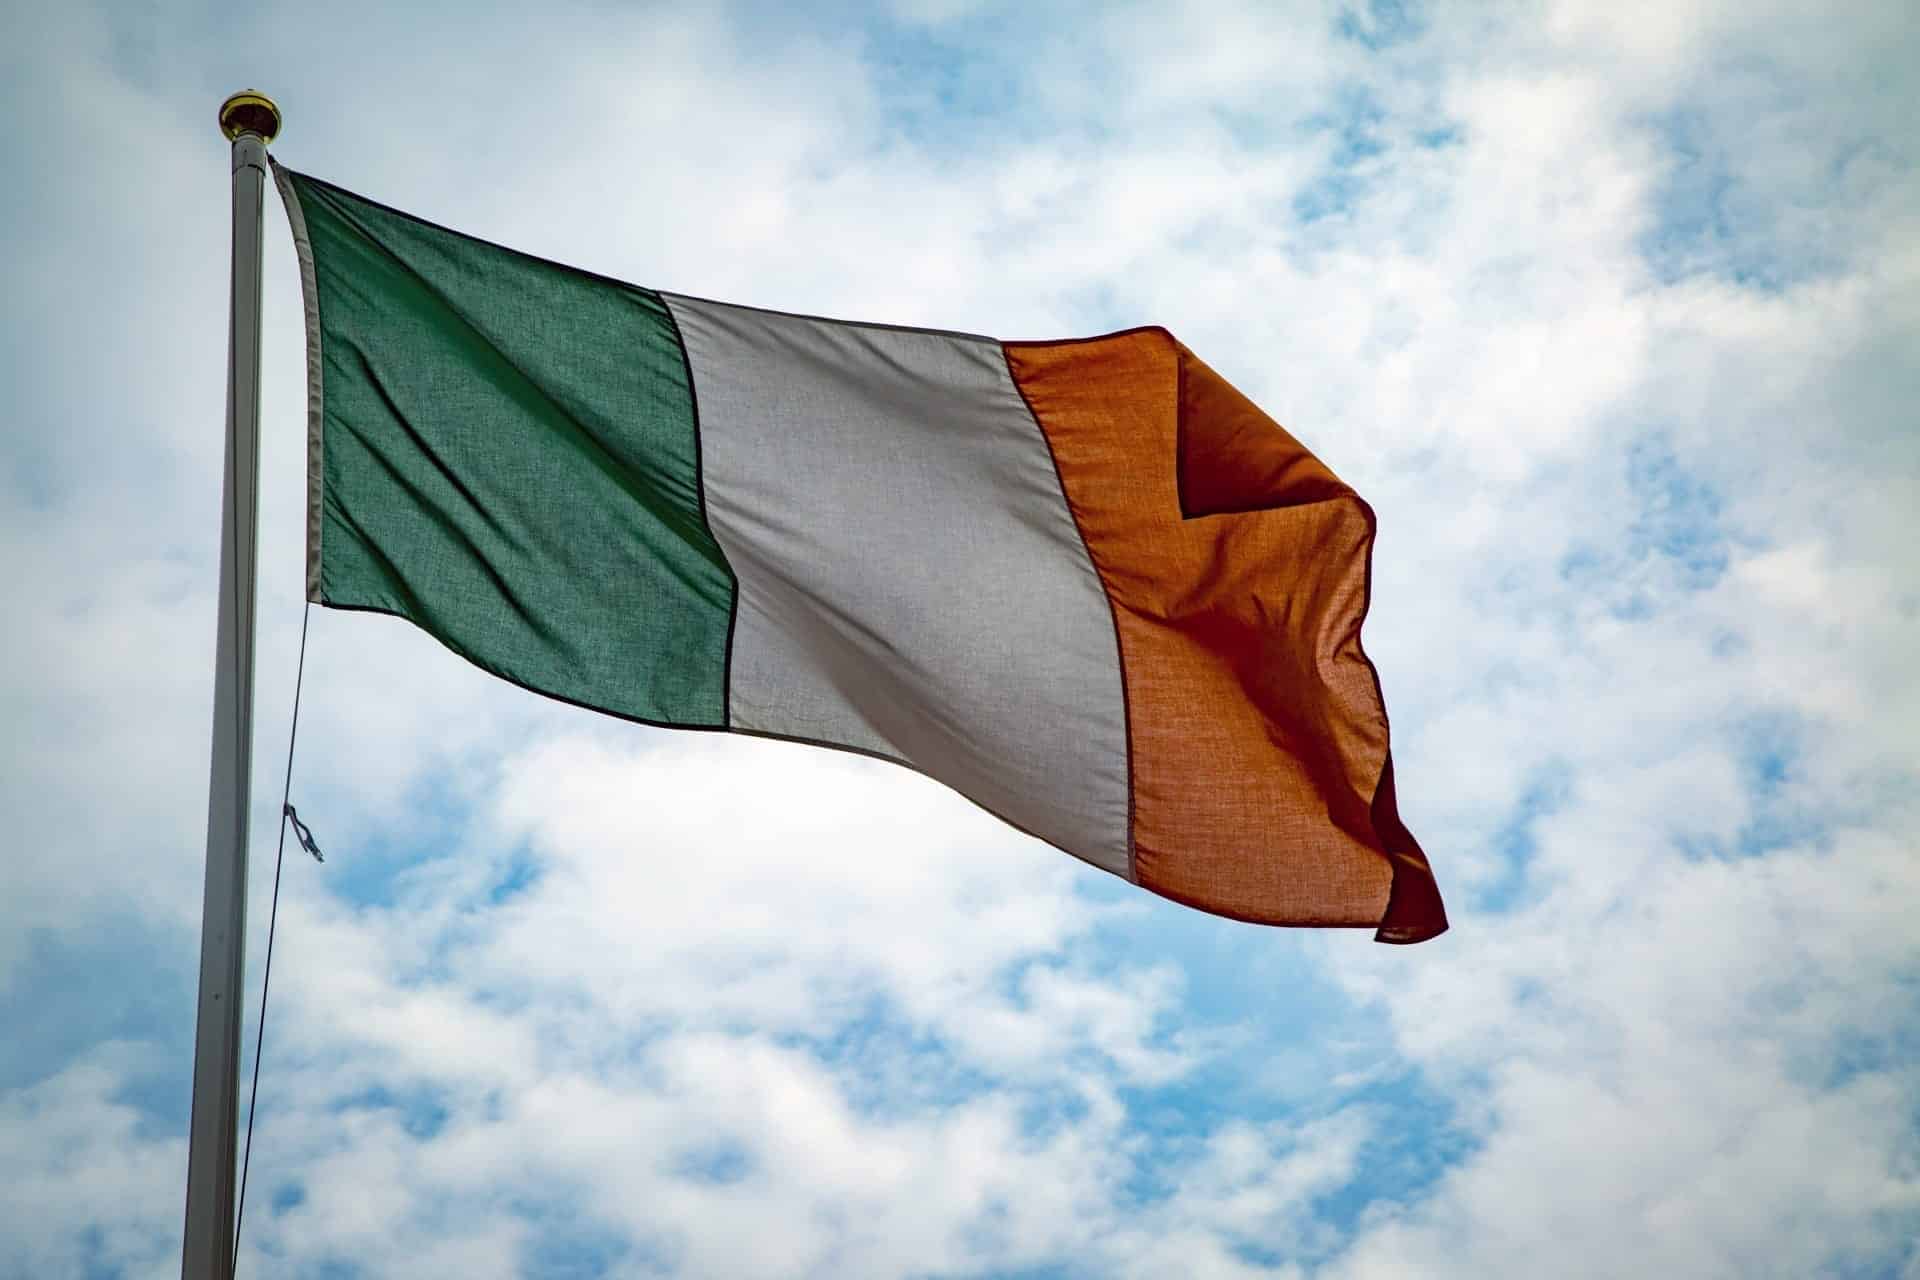 Ireland as one of the most charitable nations in the world